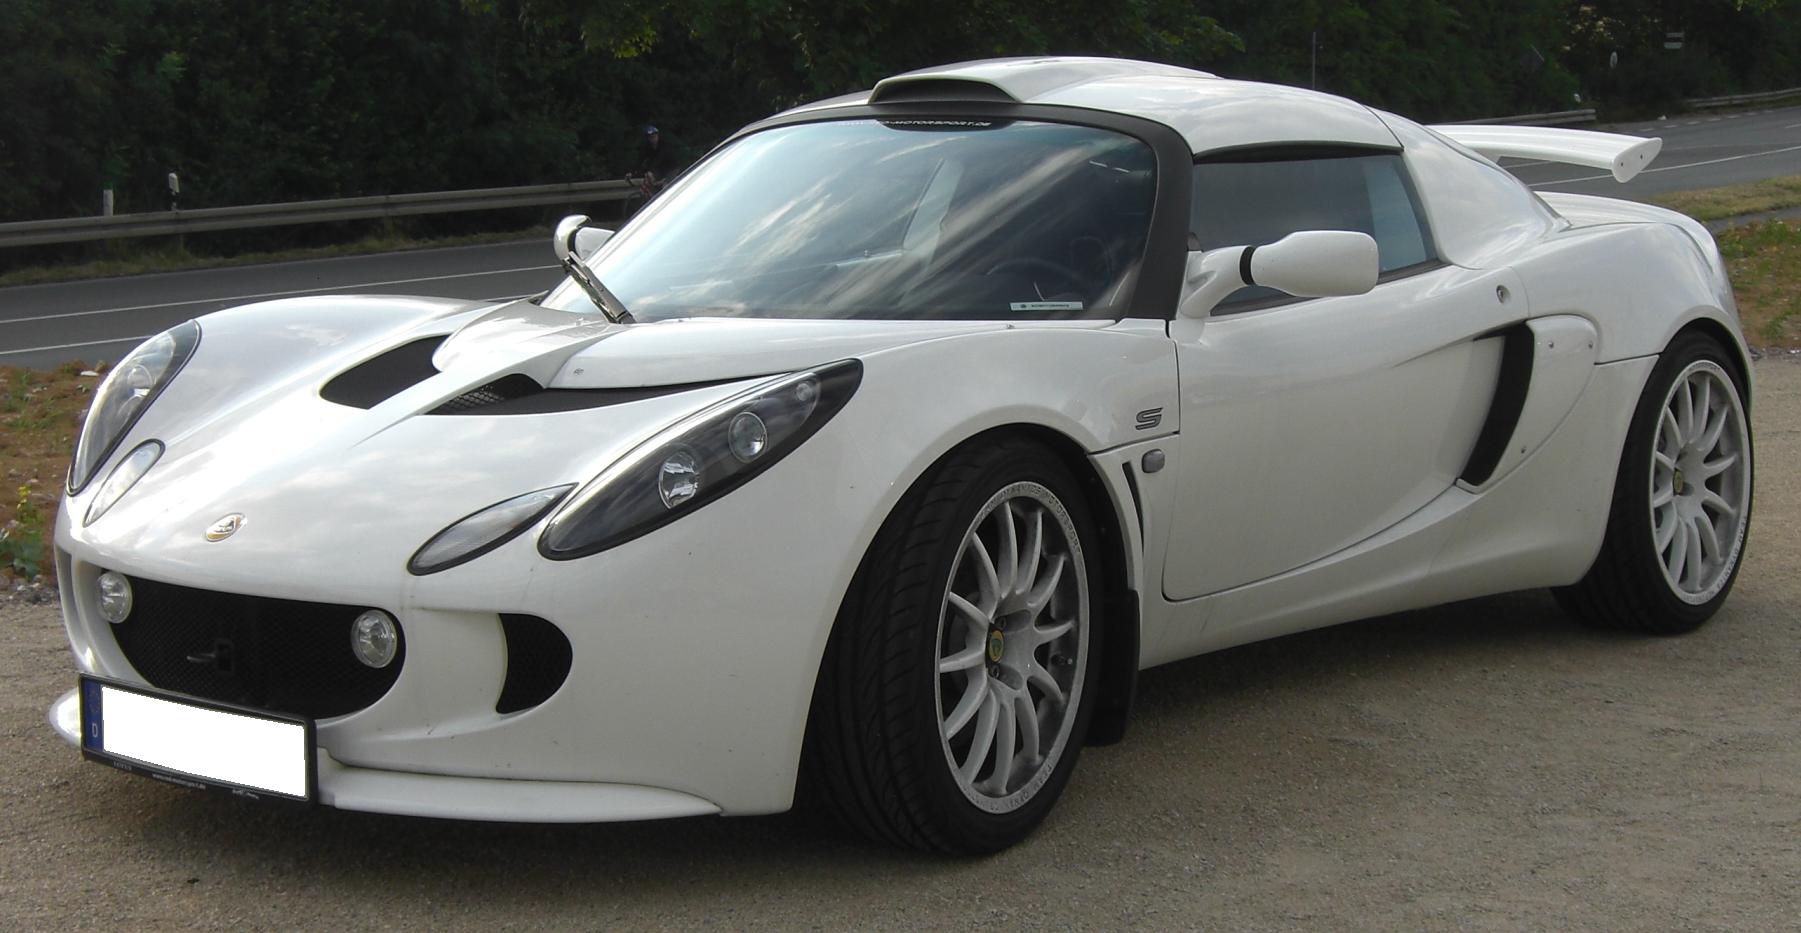 File:Lotus Exige S front.jpg - Wikimedia Commons